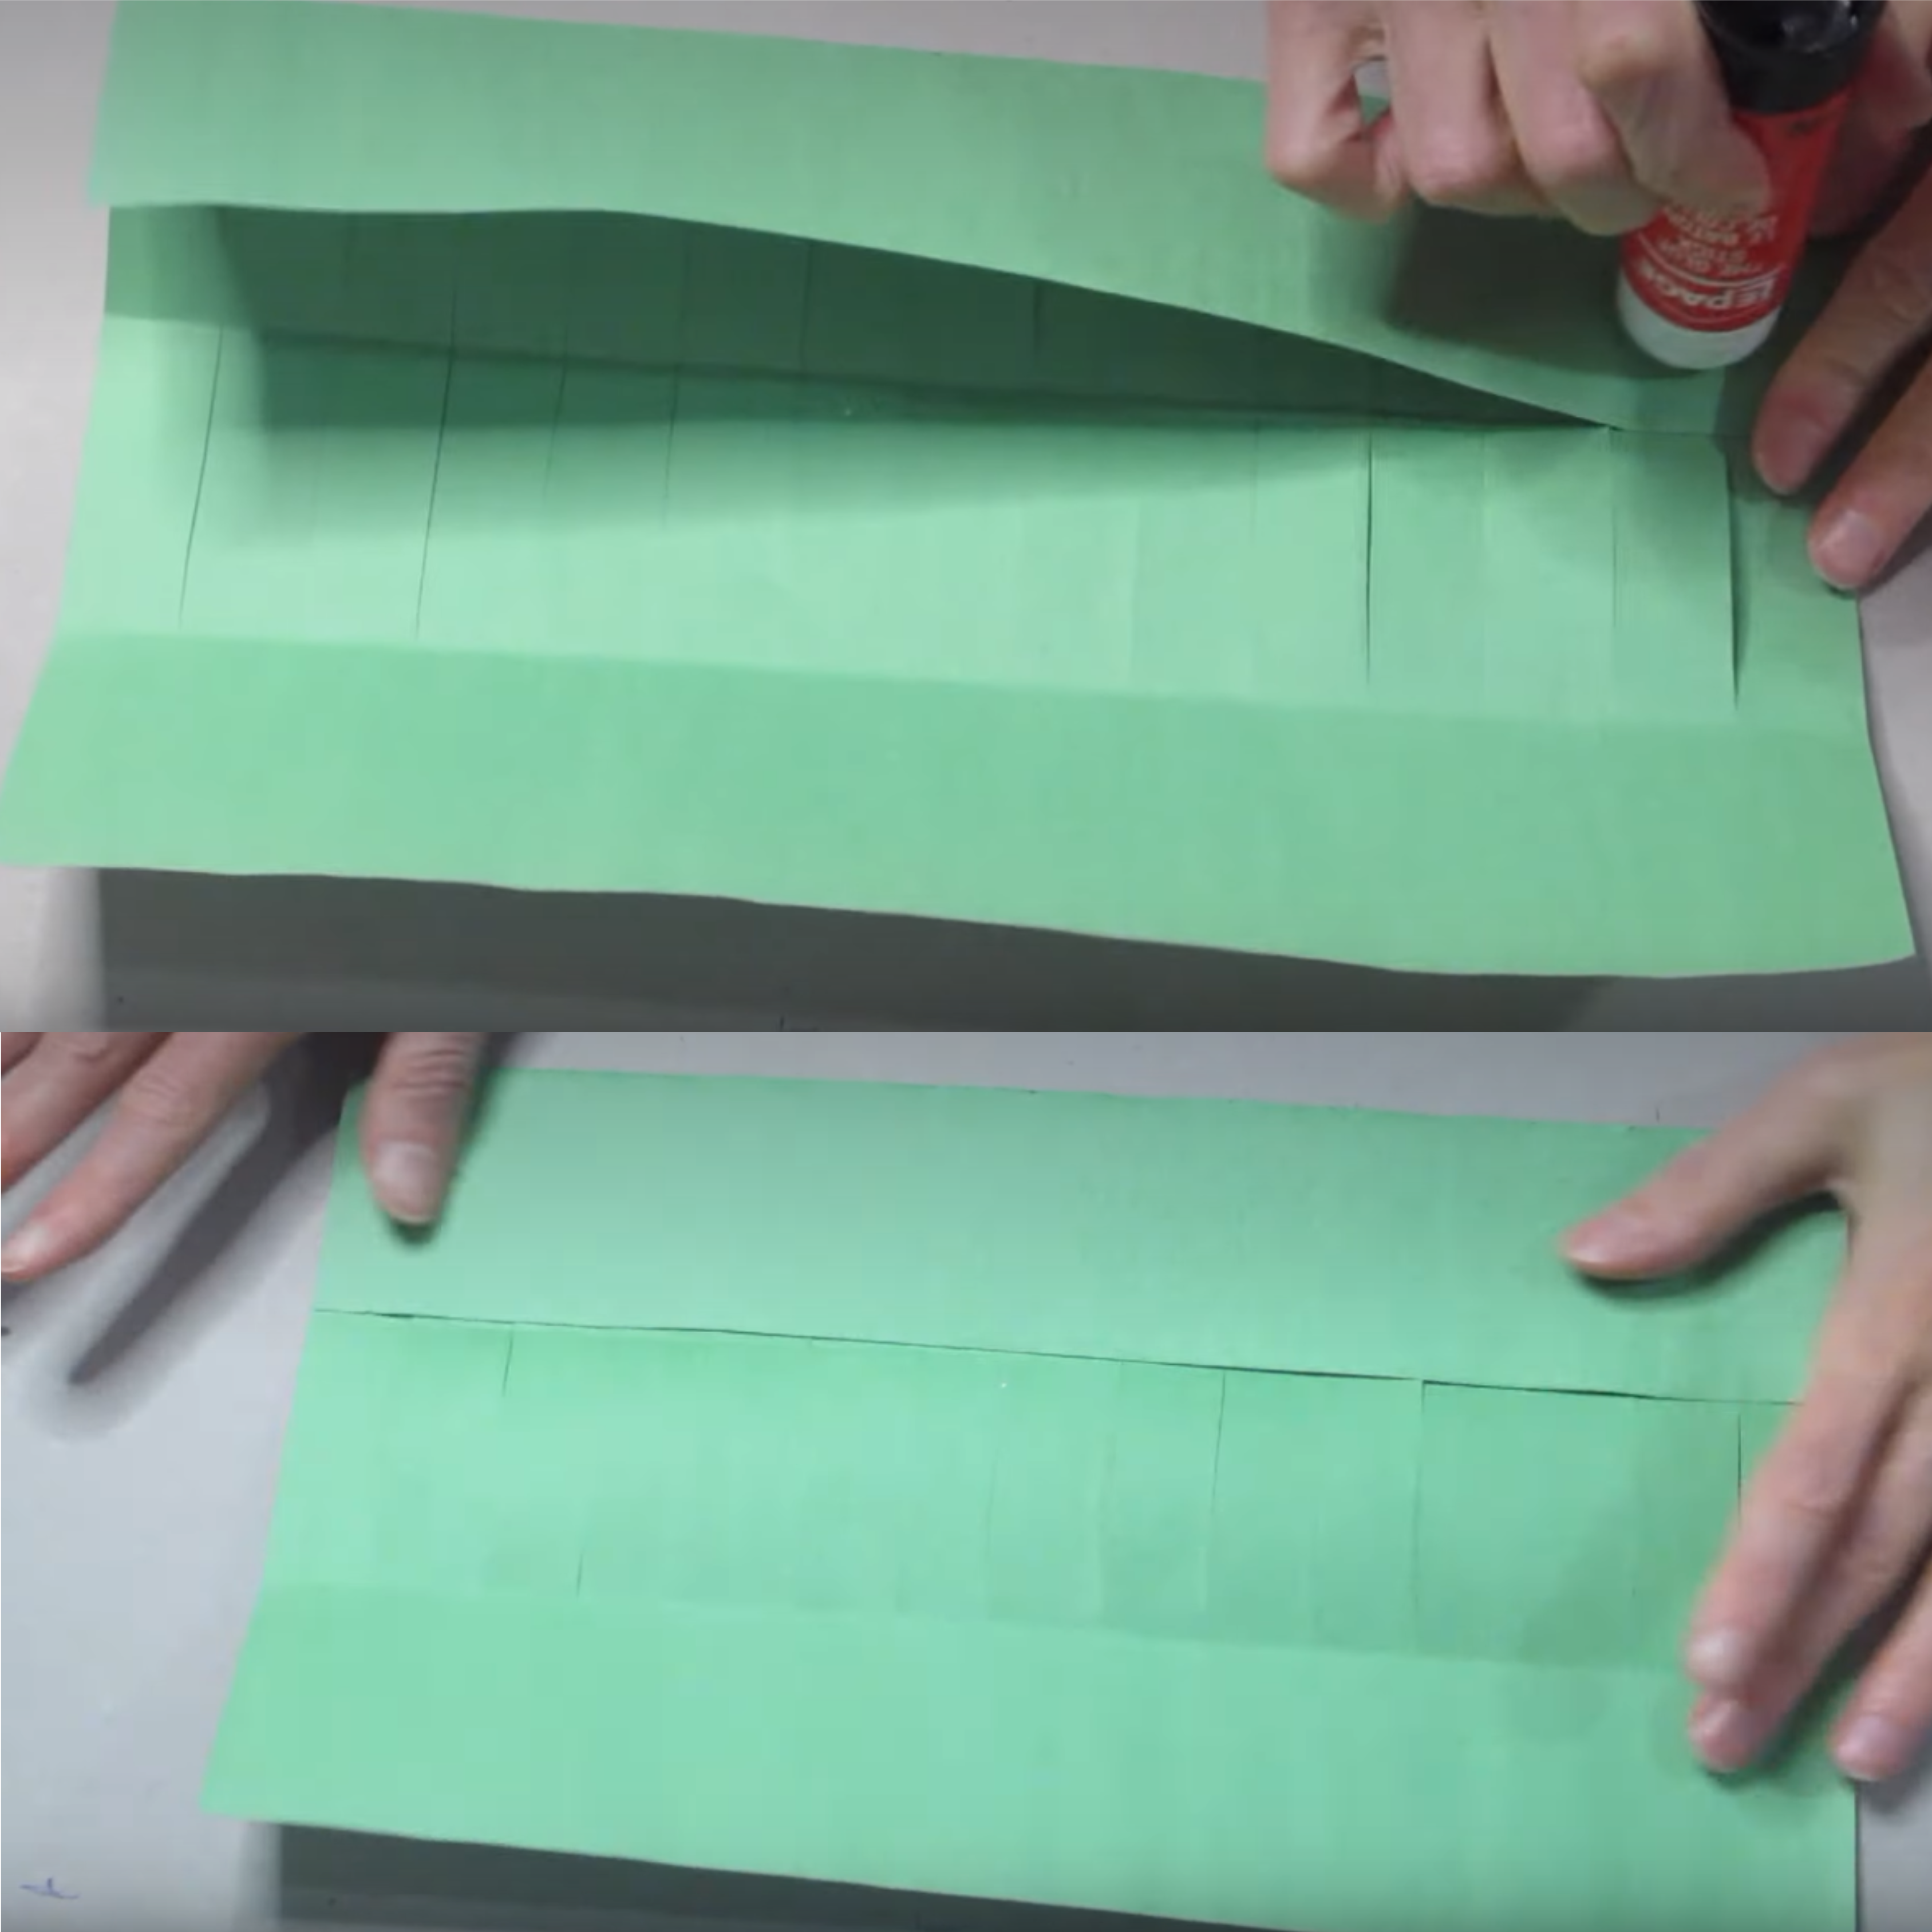 The paper is folded and glued together